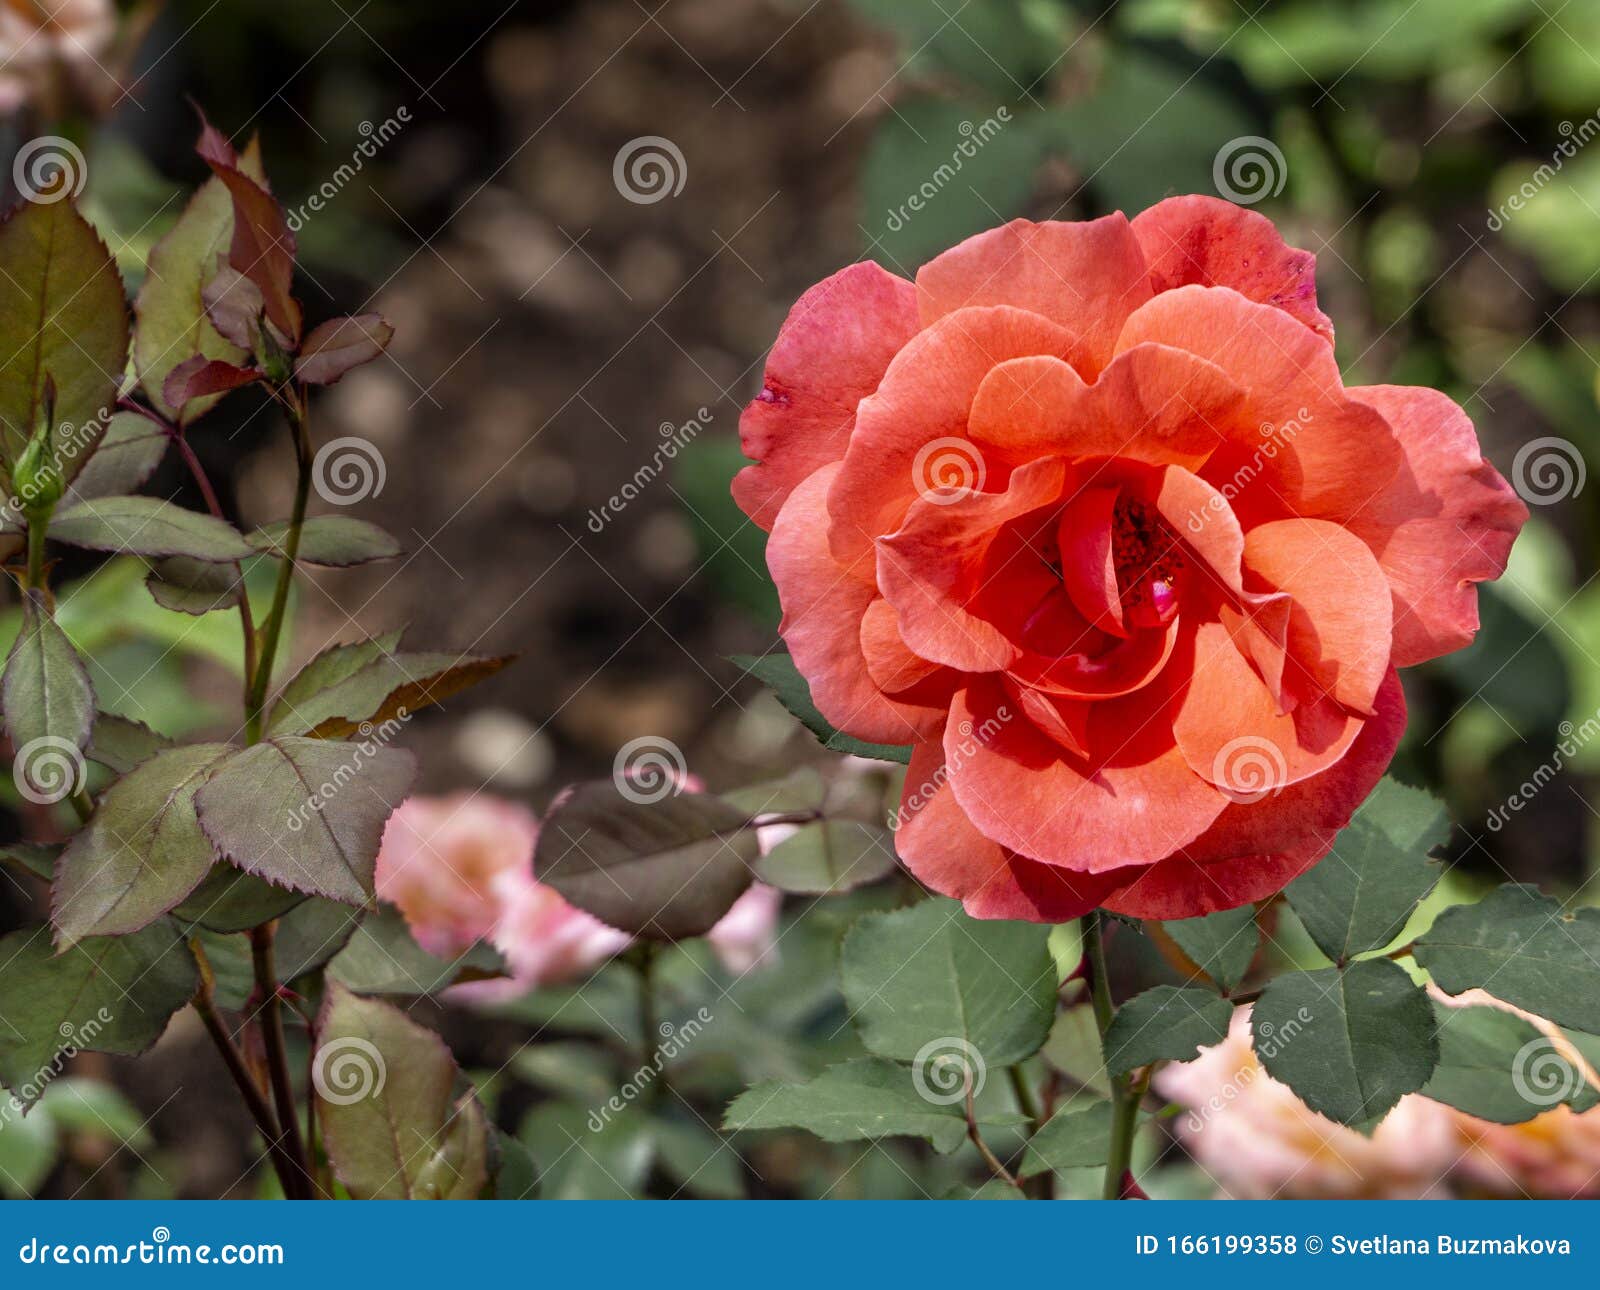 Beautiful Dark Pink Rose on a Horizontal Background with Leaves Stock ...